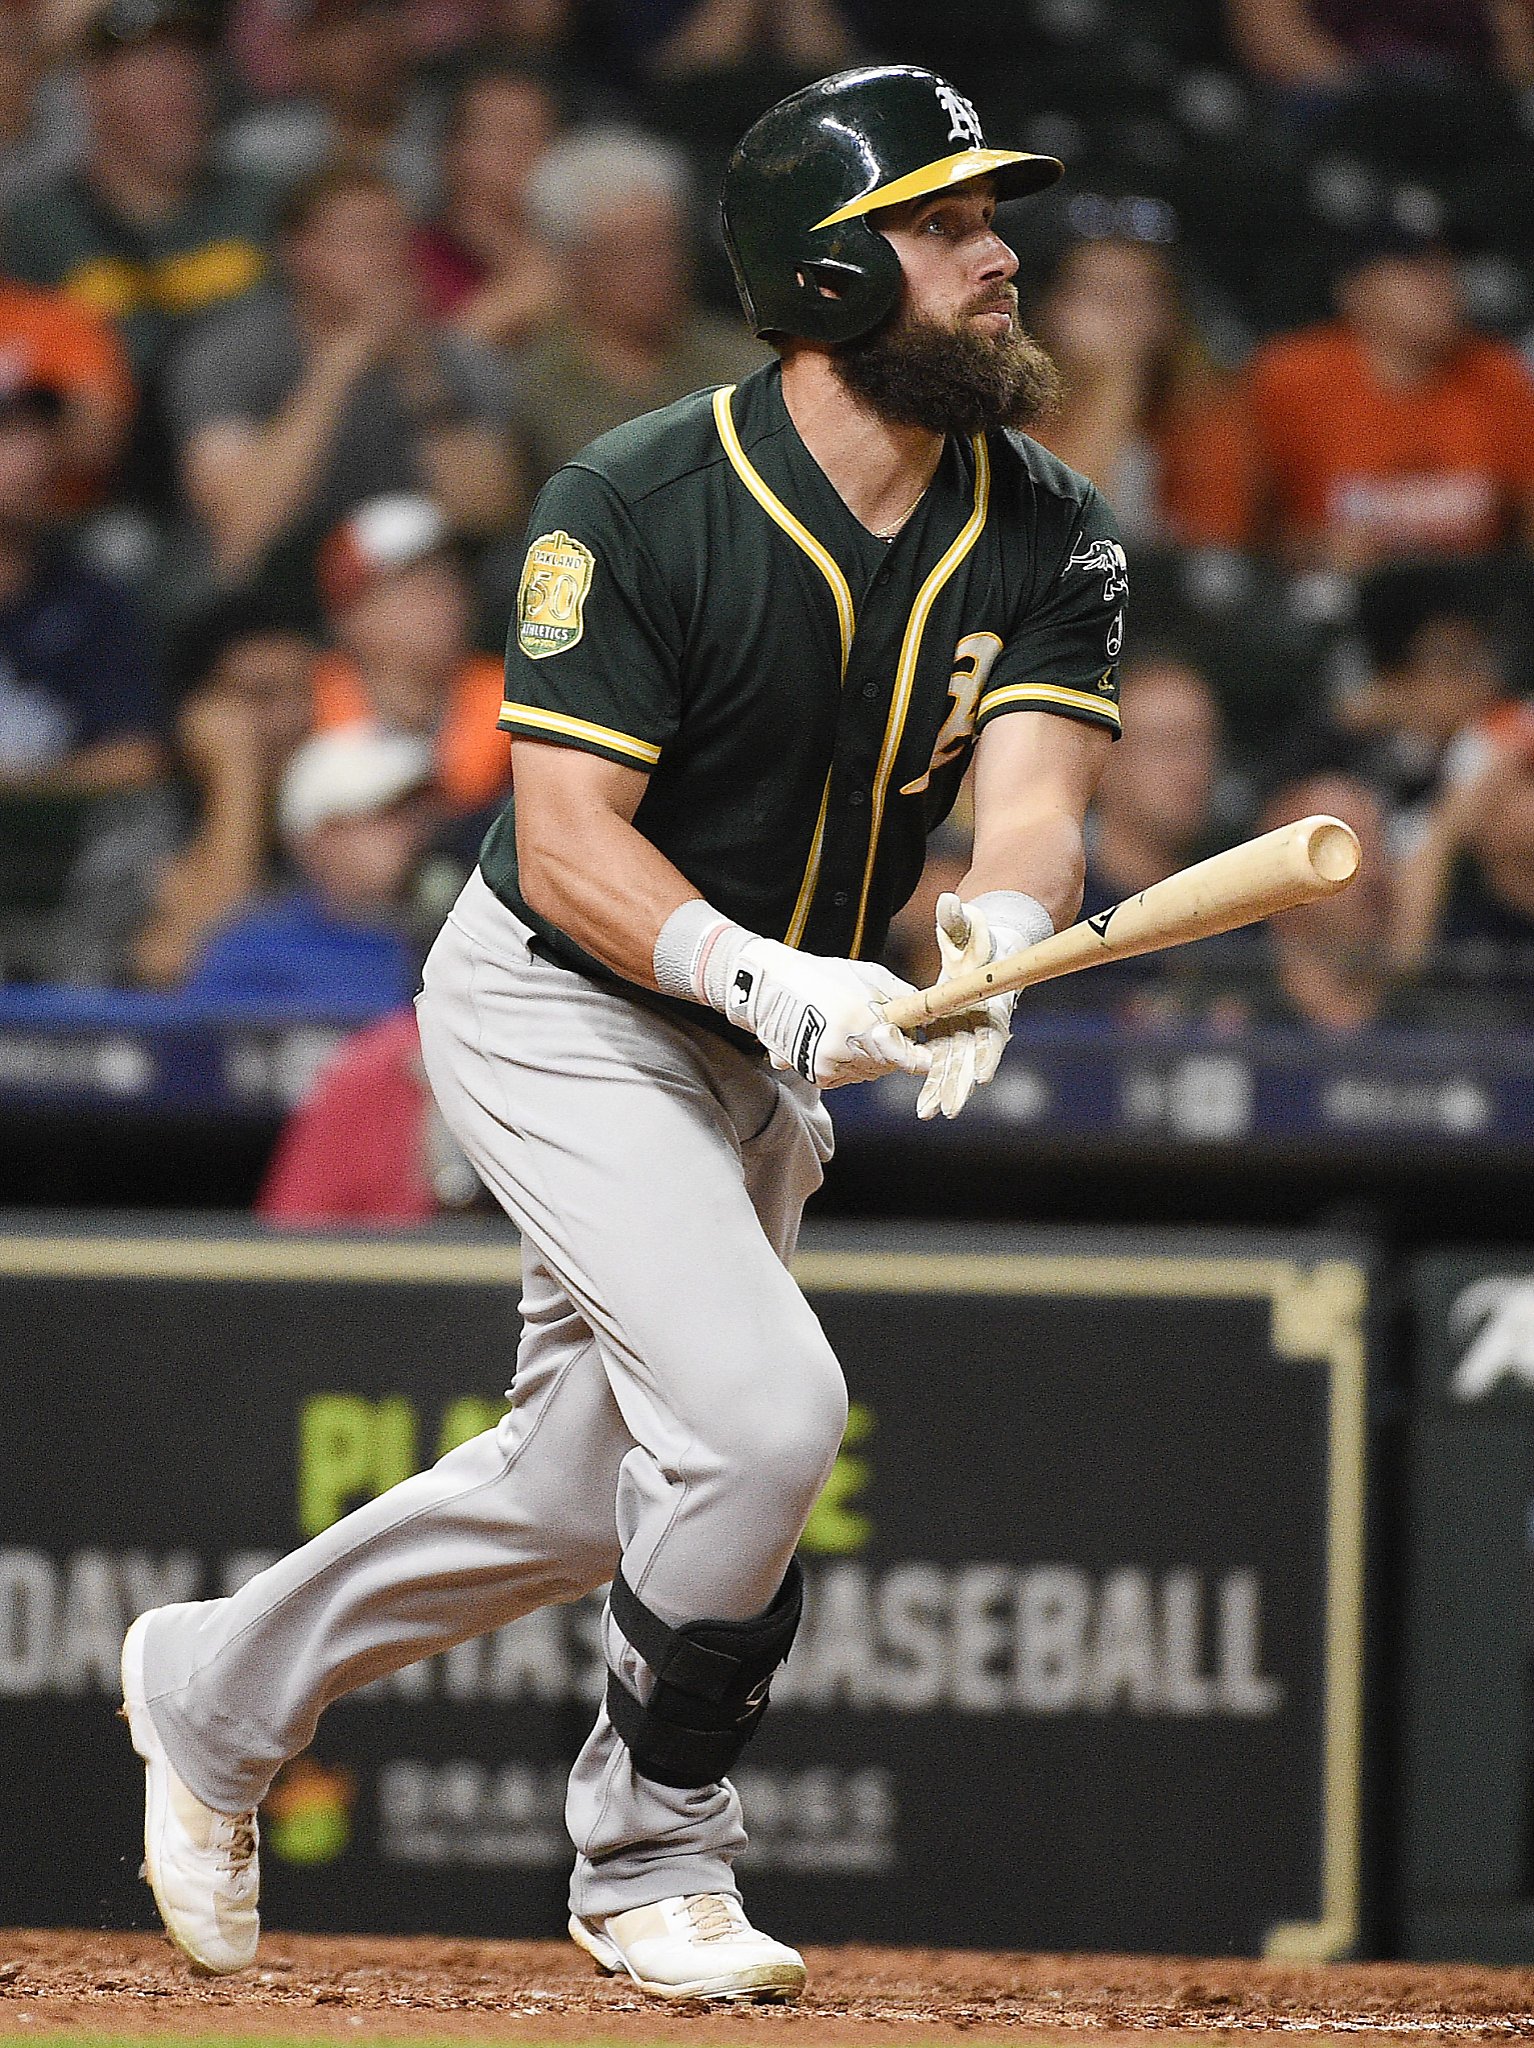 Slumping Nick Martini delivers in ninth to help A’s beat Astros - SFGate